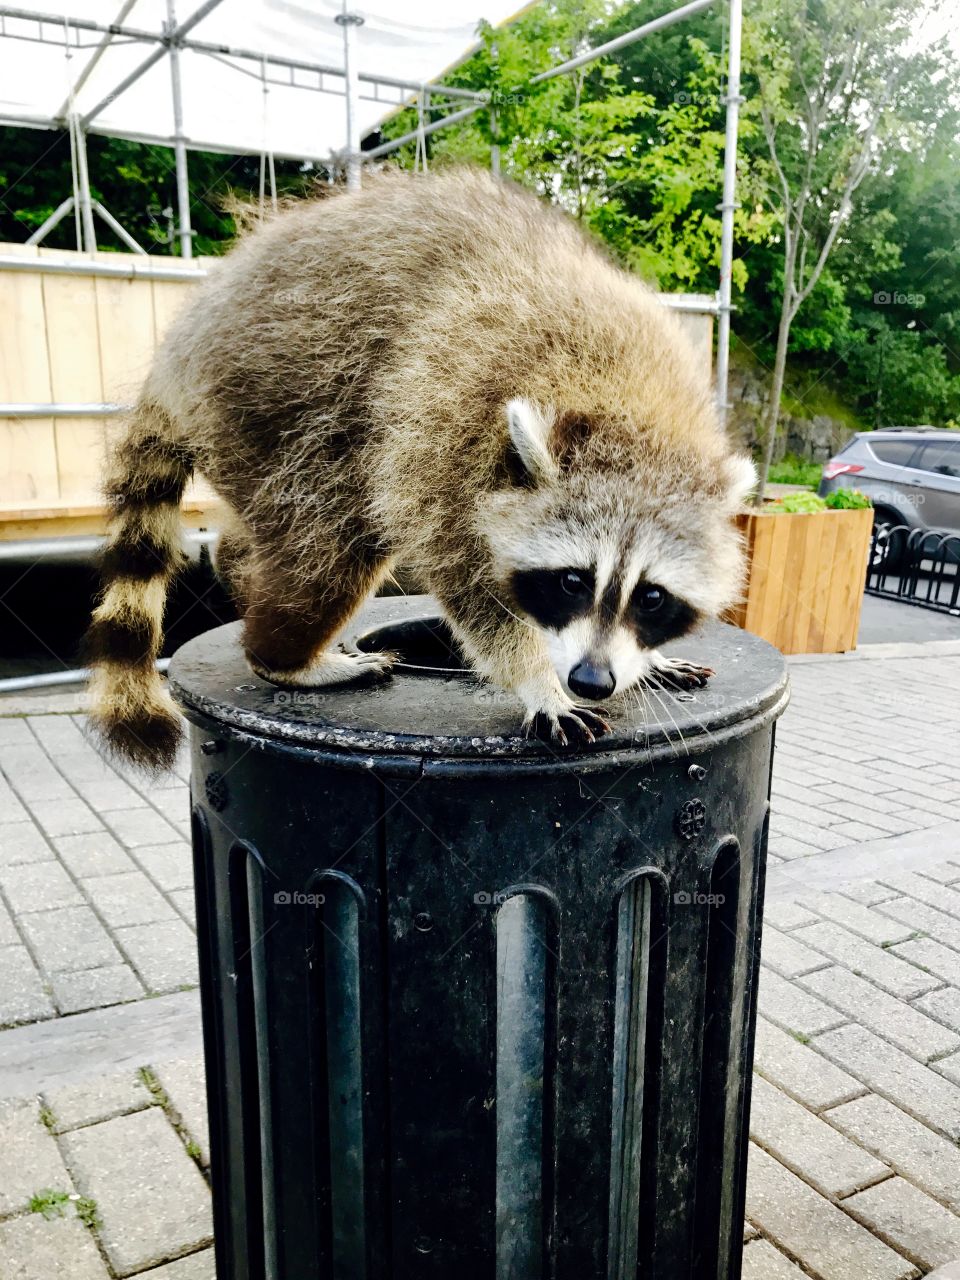 Racoon in the neighbourhood declared dibs on the trash can